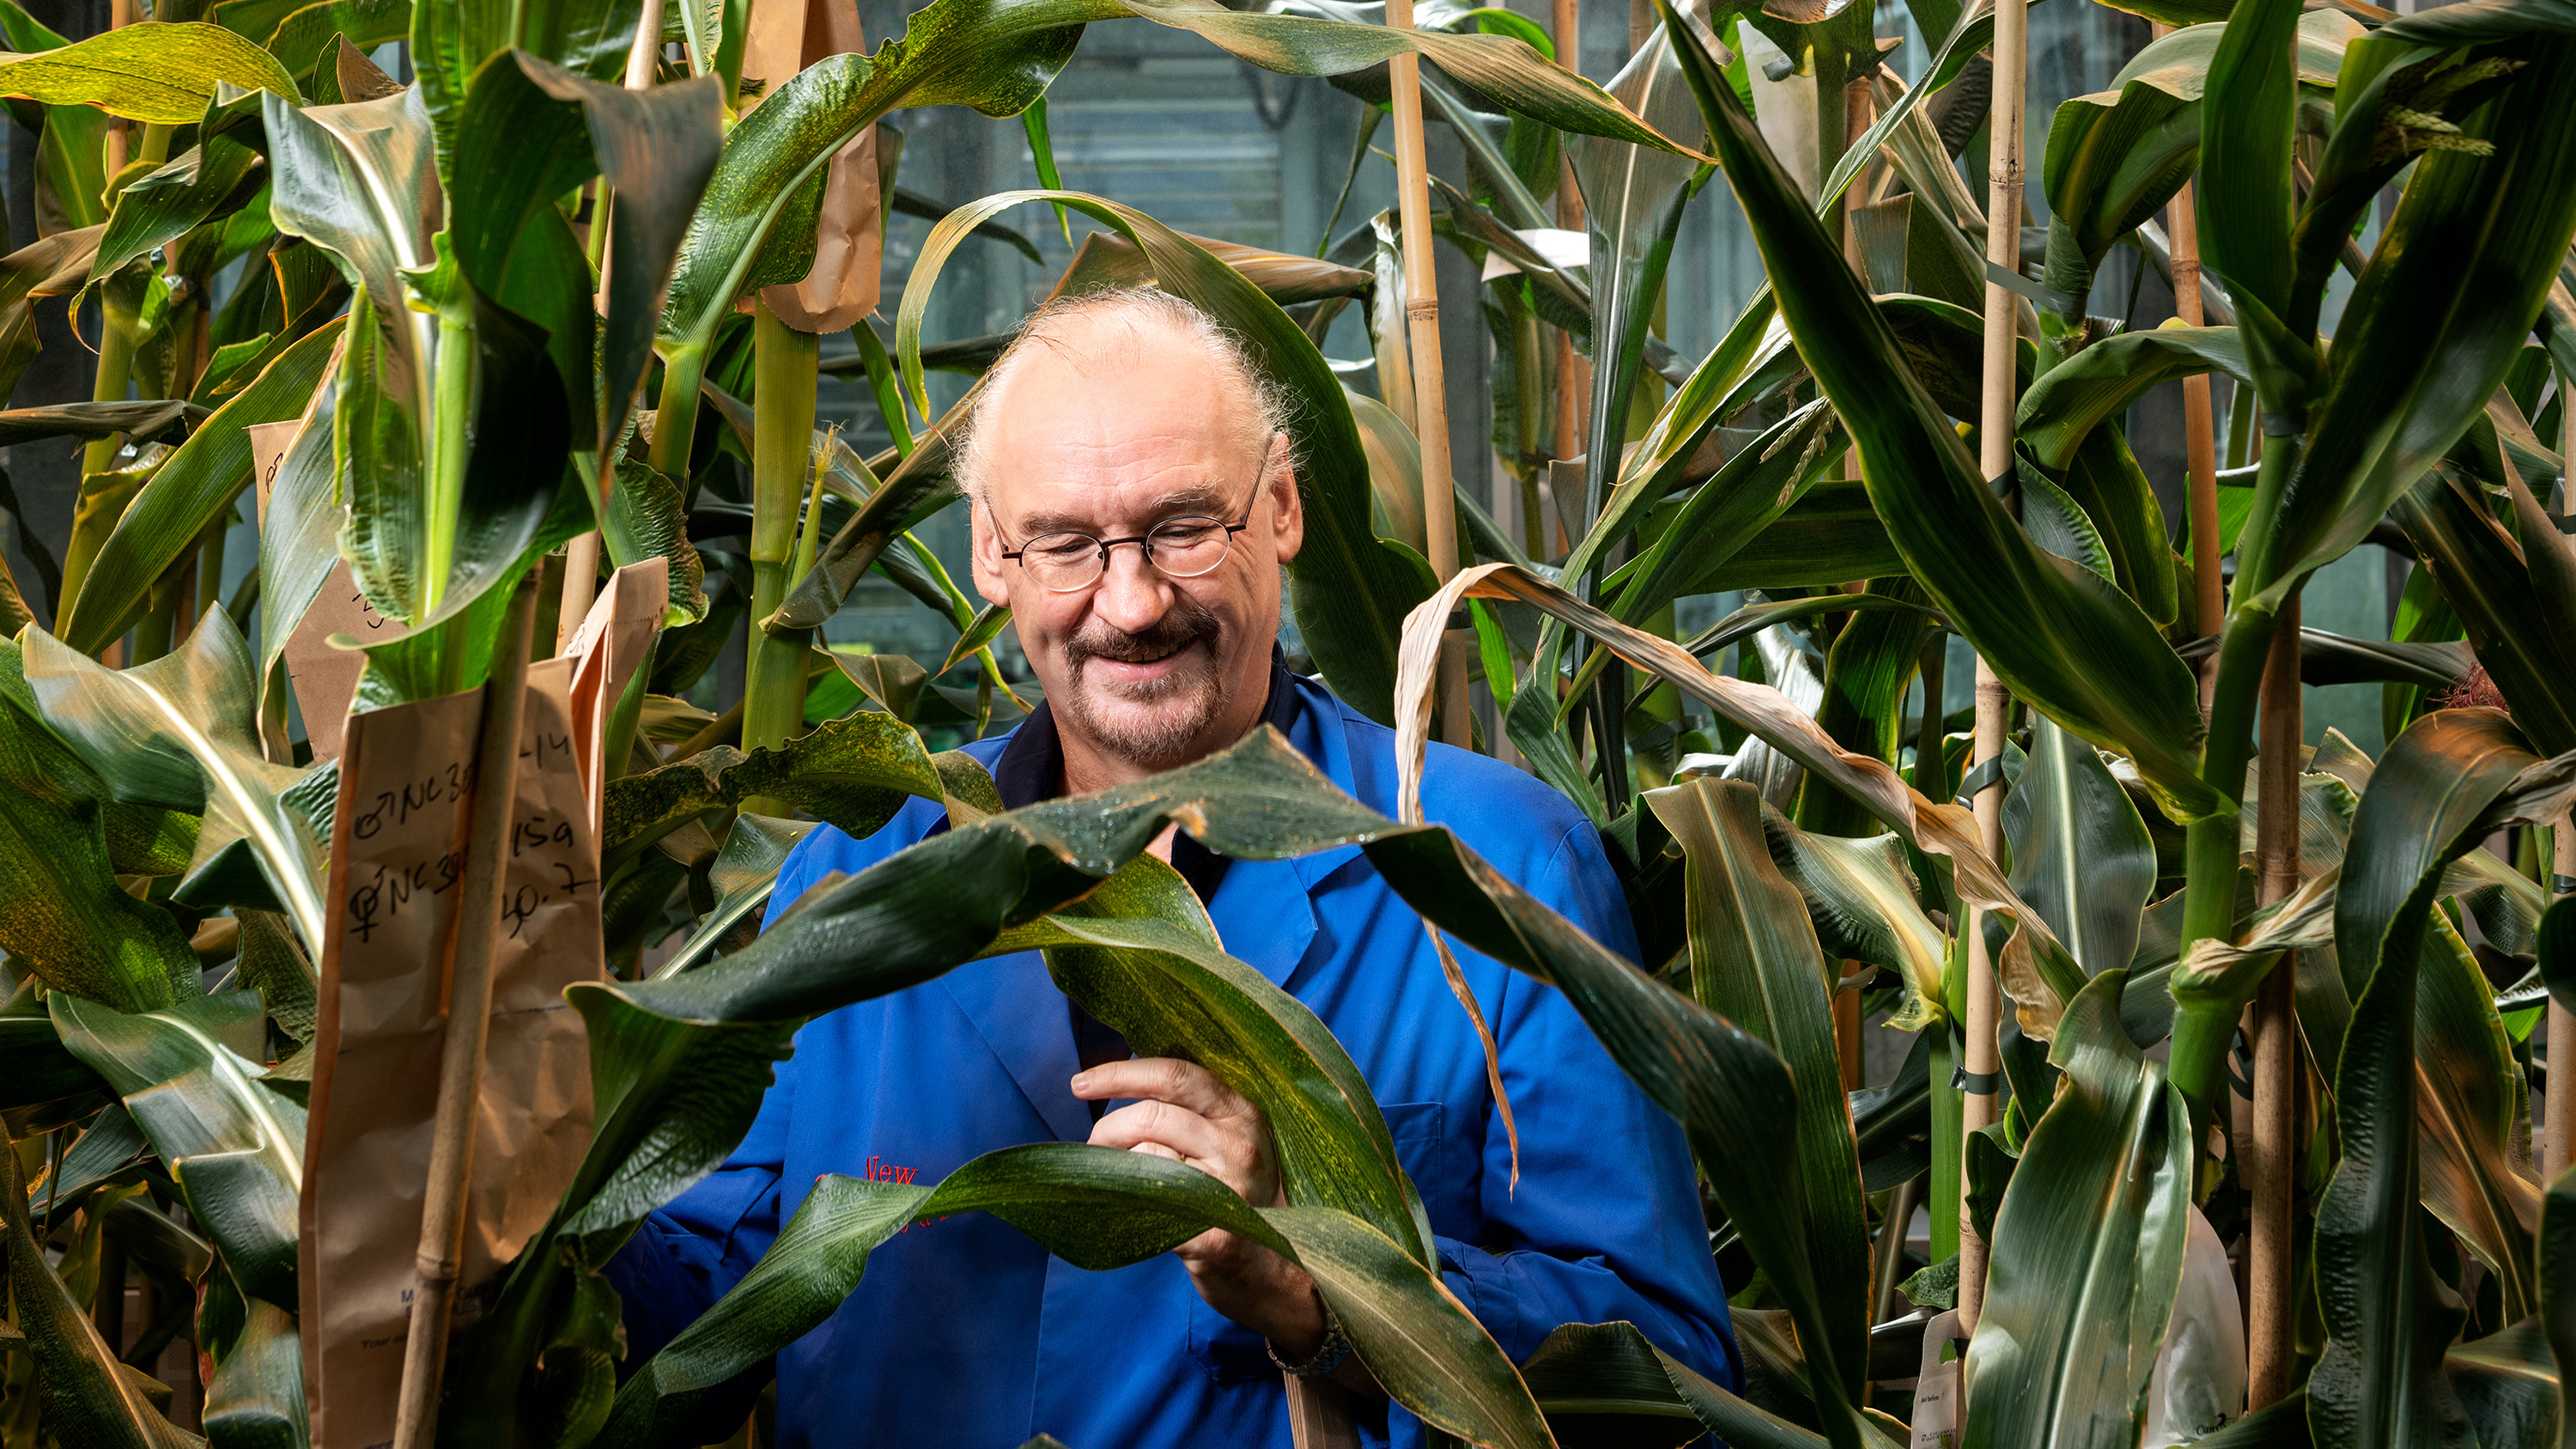 Researcher Ueli Grossniklaus in the middle of maiz plants.